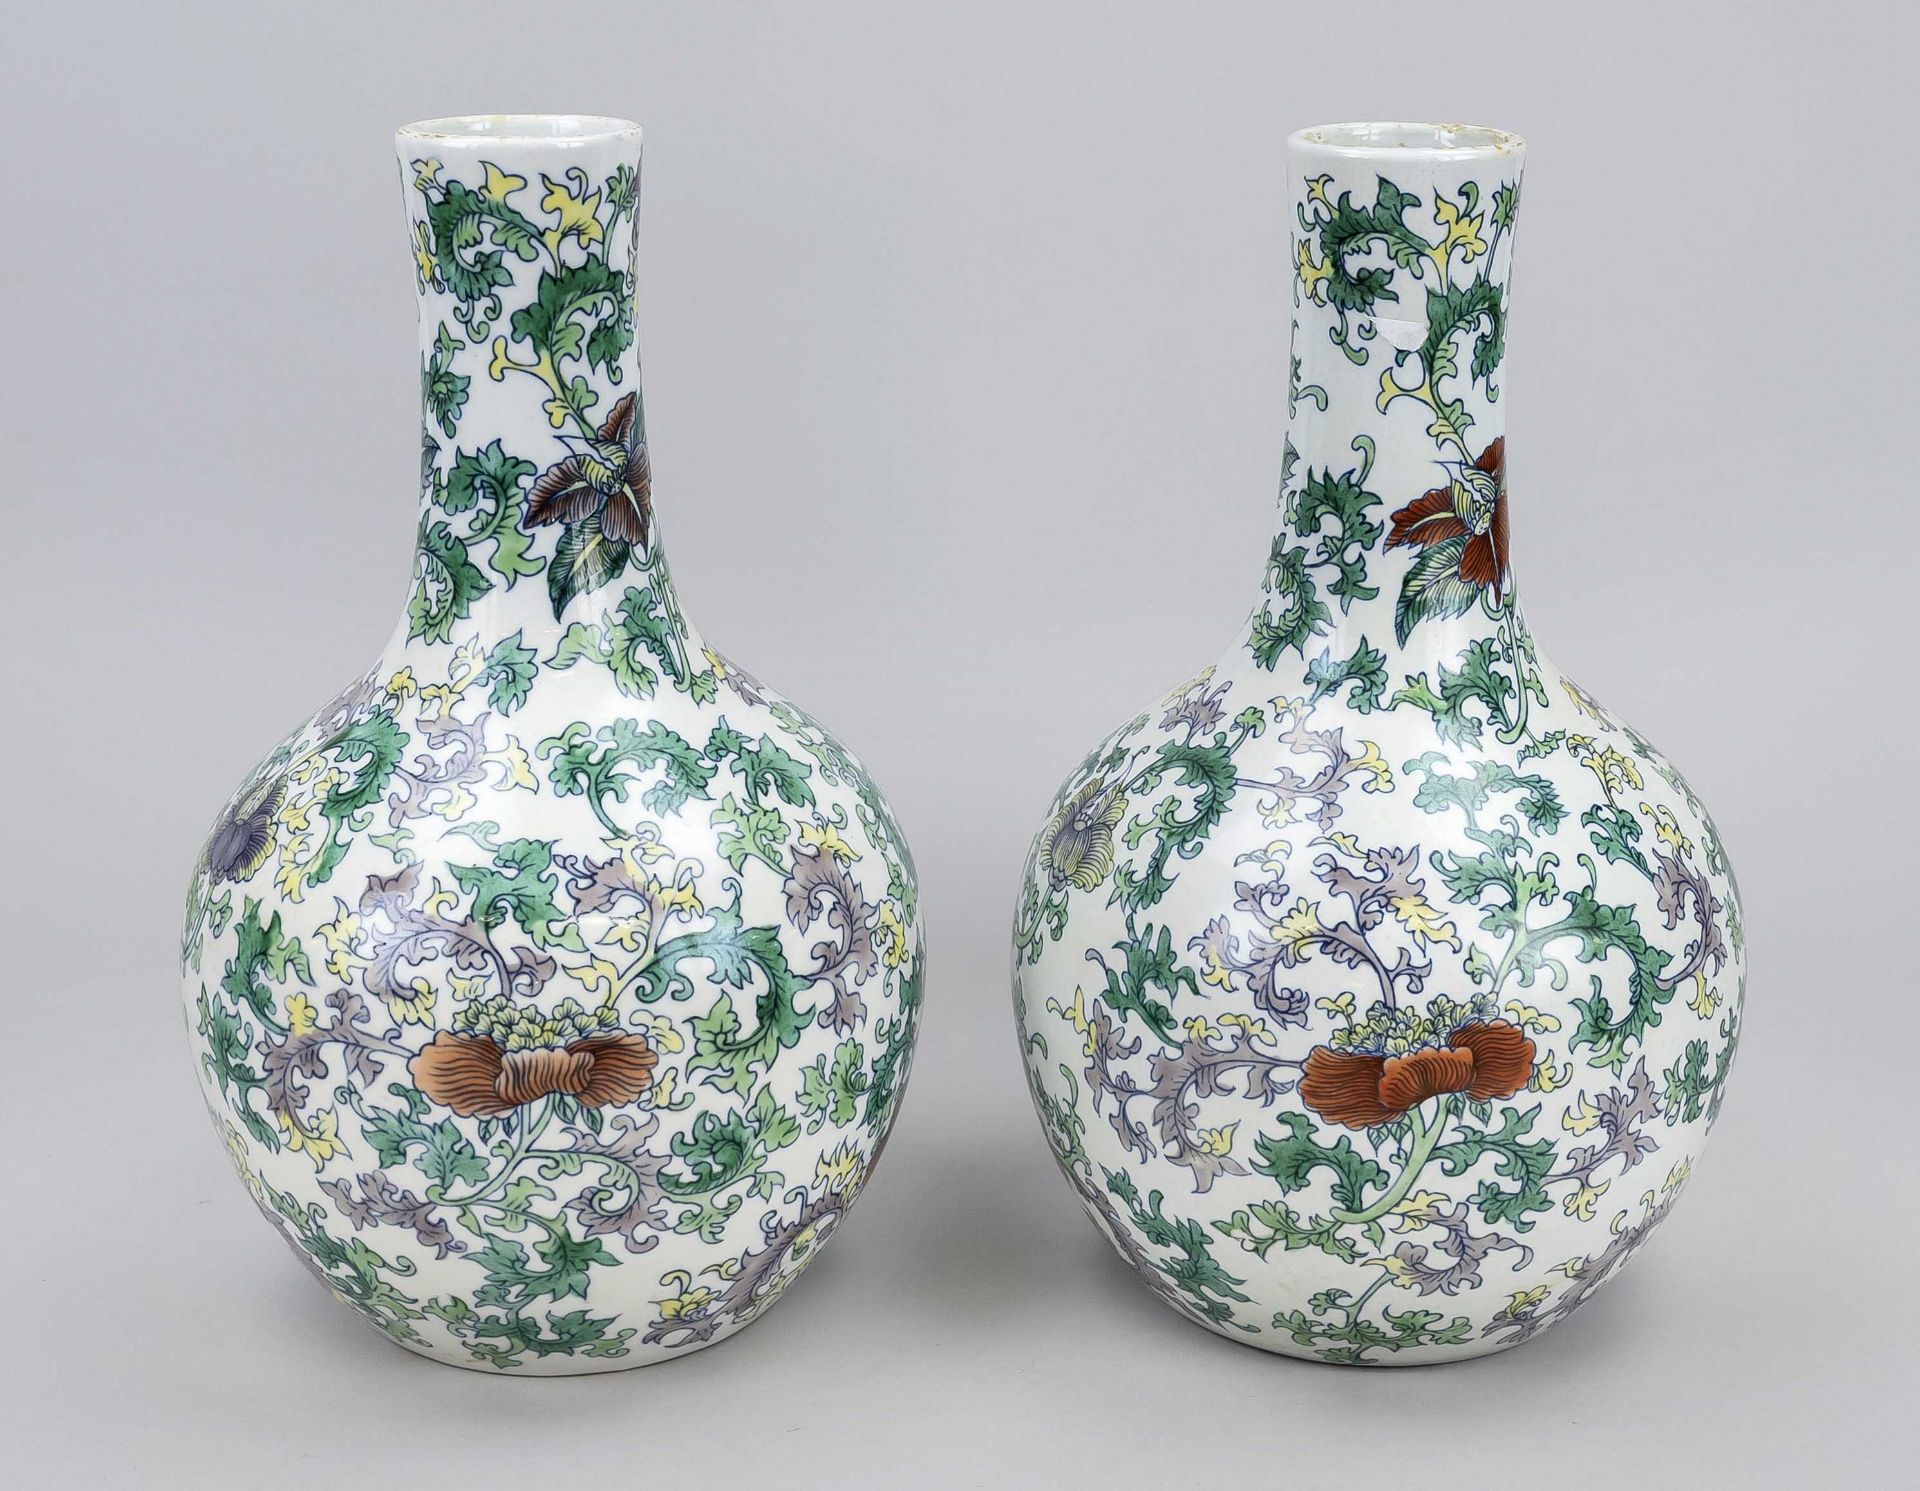 Pair of vases, China, 20th century, polychrome decoration with flowers and tendrils. Bottom